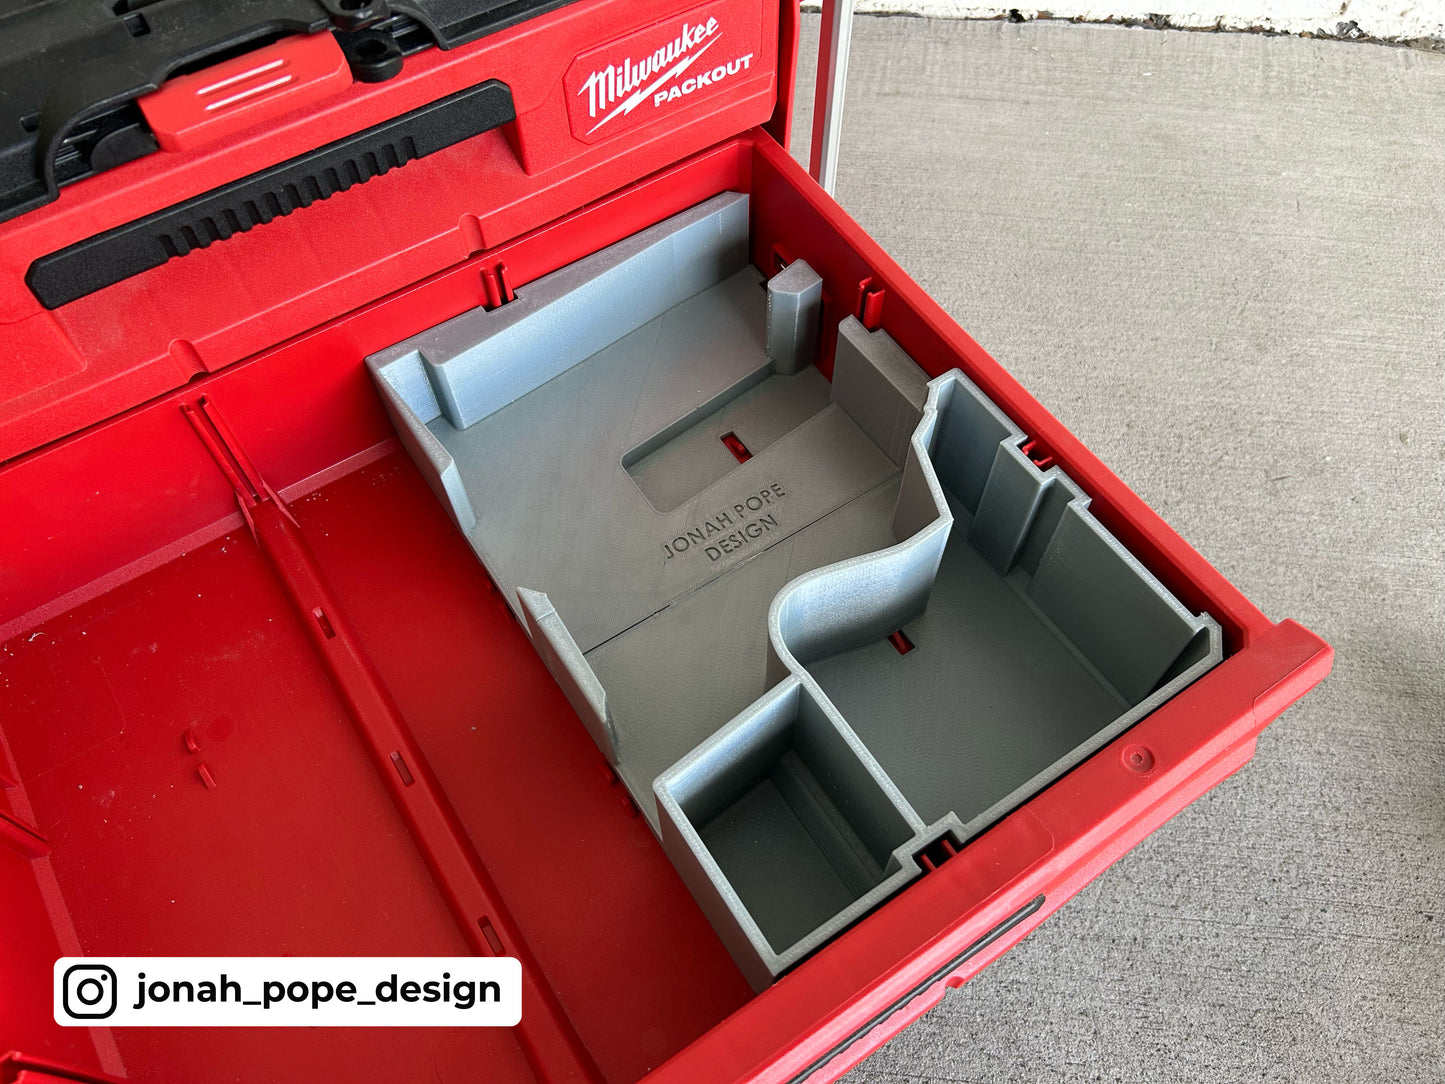 Milwaukee Packout M12 Pin Nailer Storage Insert for Milwaukee Packout 2/3 Draw By Jonah Pope Design